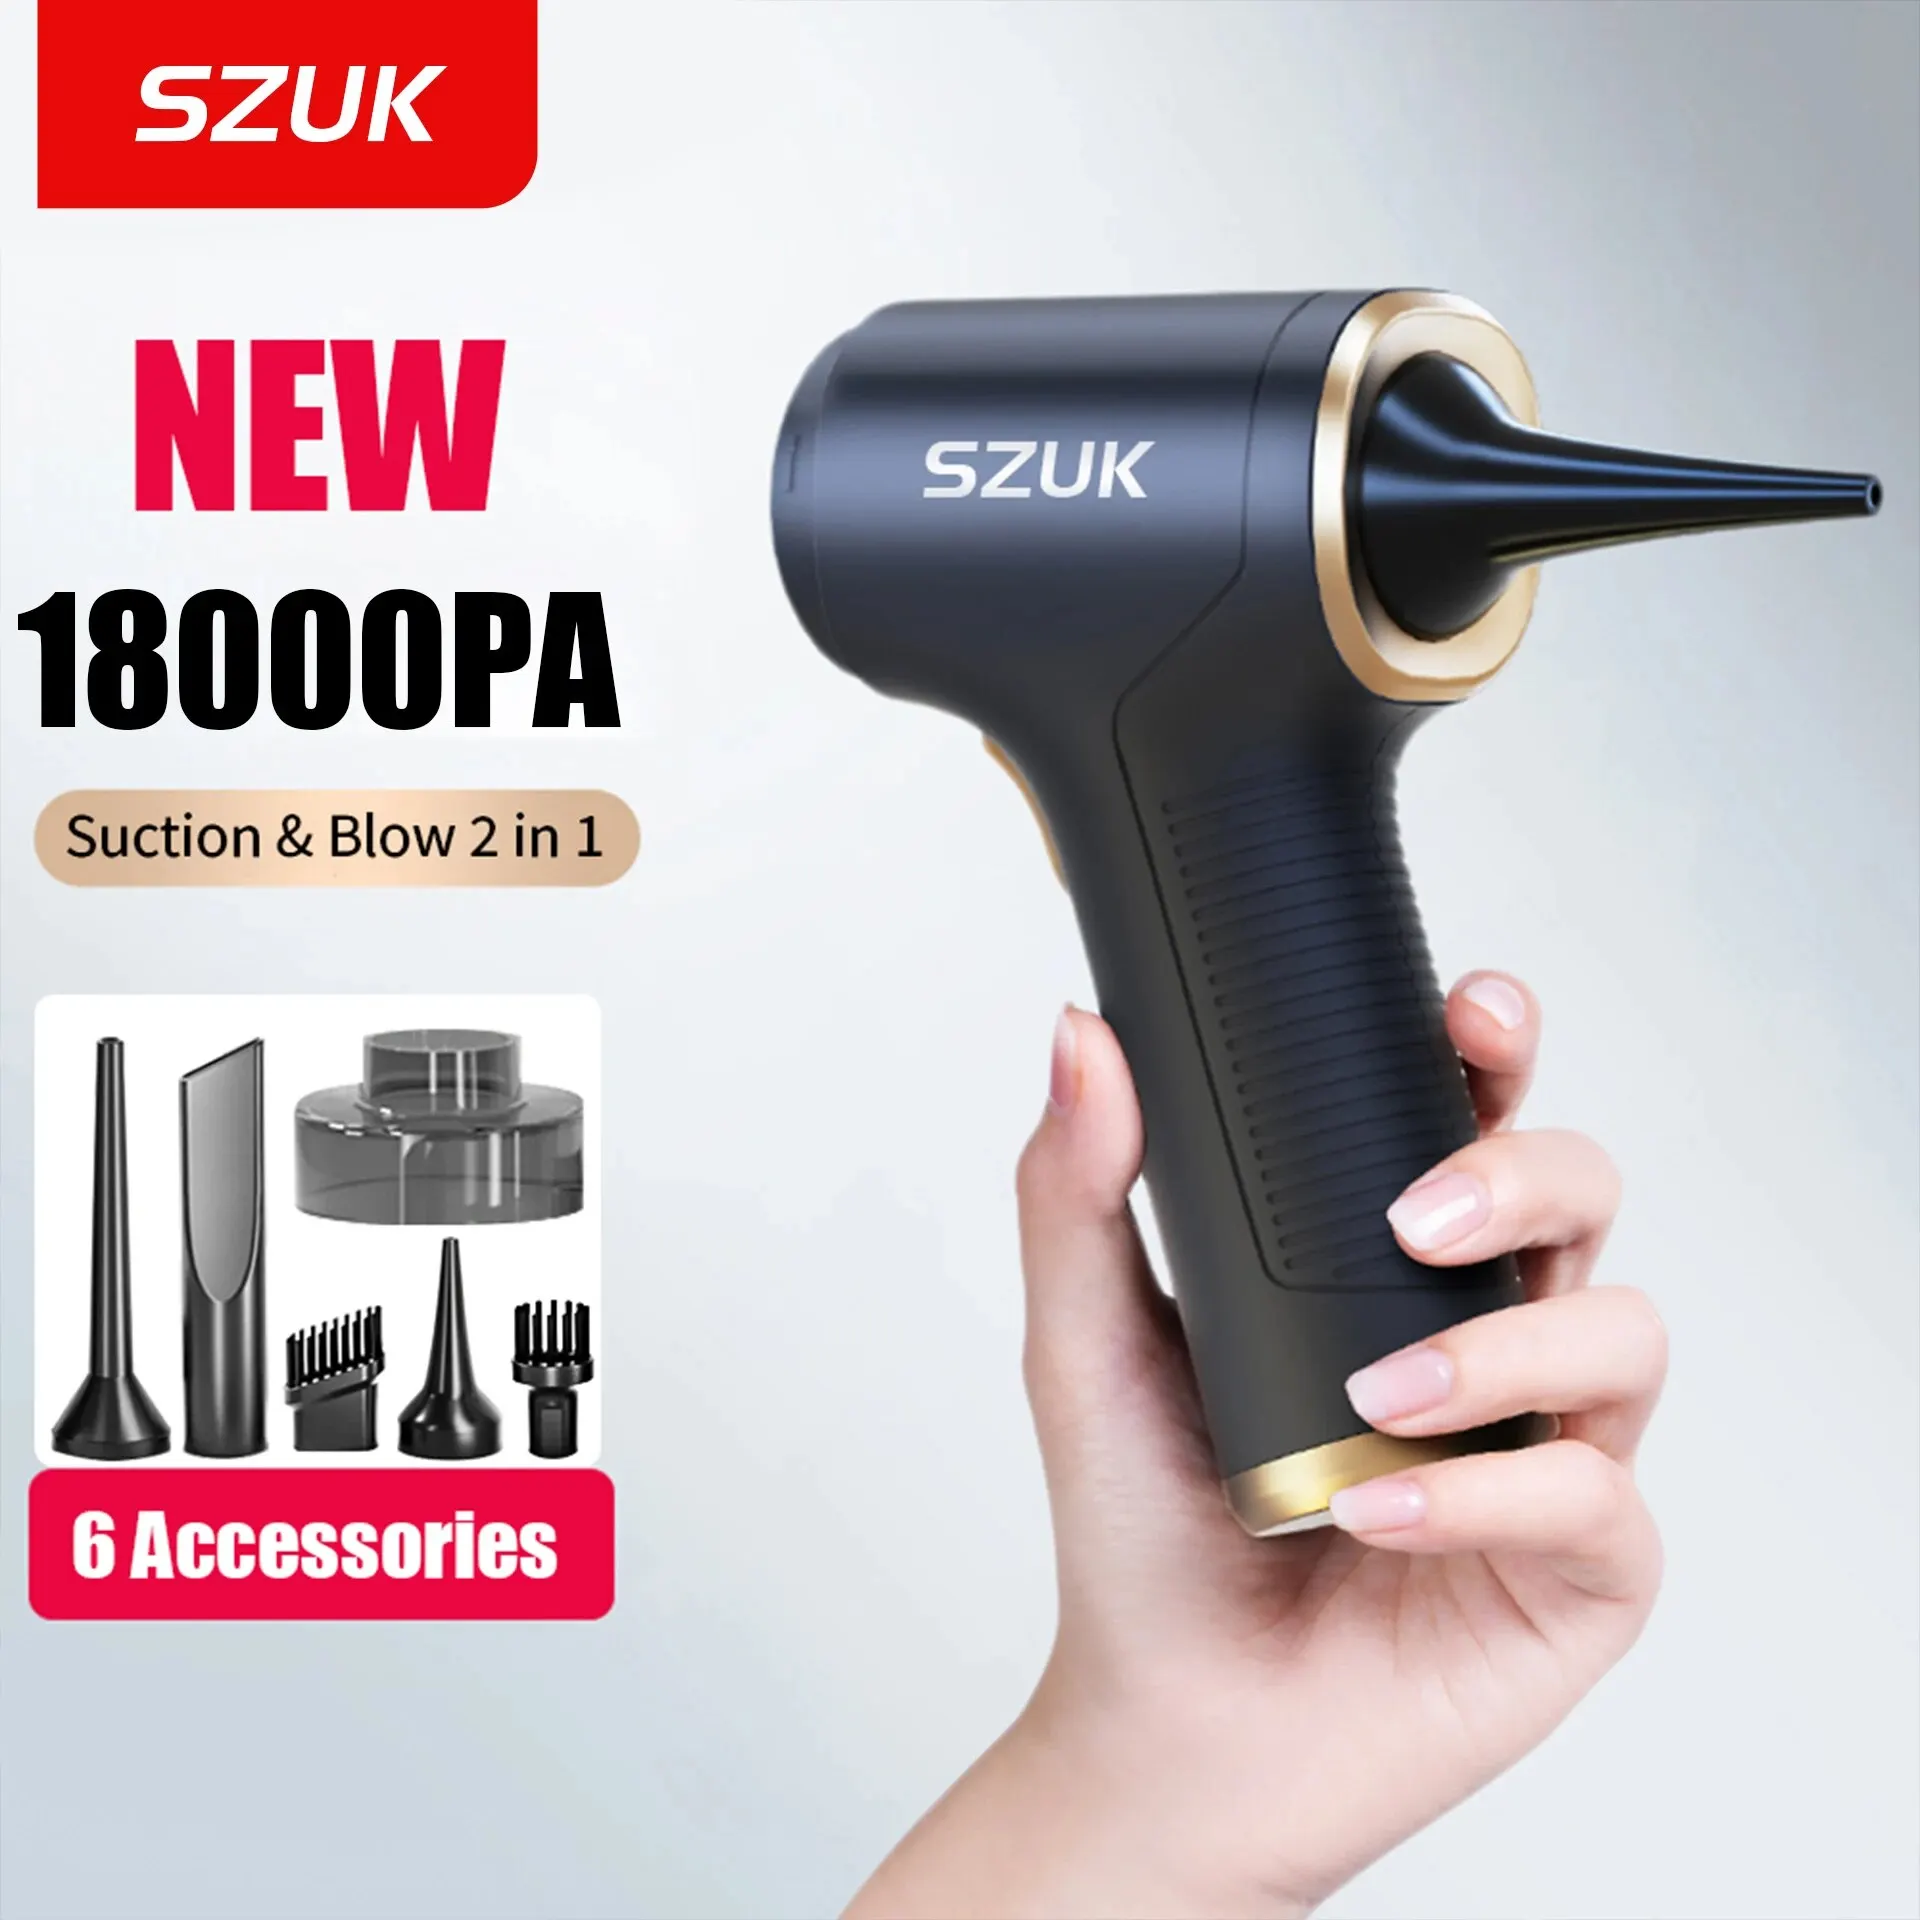 SZUK 18000PA Car Vacuum Cleaner Powerful 3 in 1 Brushless Motor Handheld Cordless Rechargeable Portable Mini Car Vacuum Cleaner with Multi-nozzles and Floor Brush for Car Home Pet Hair Cleaning 11